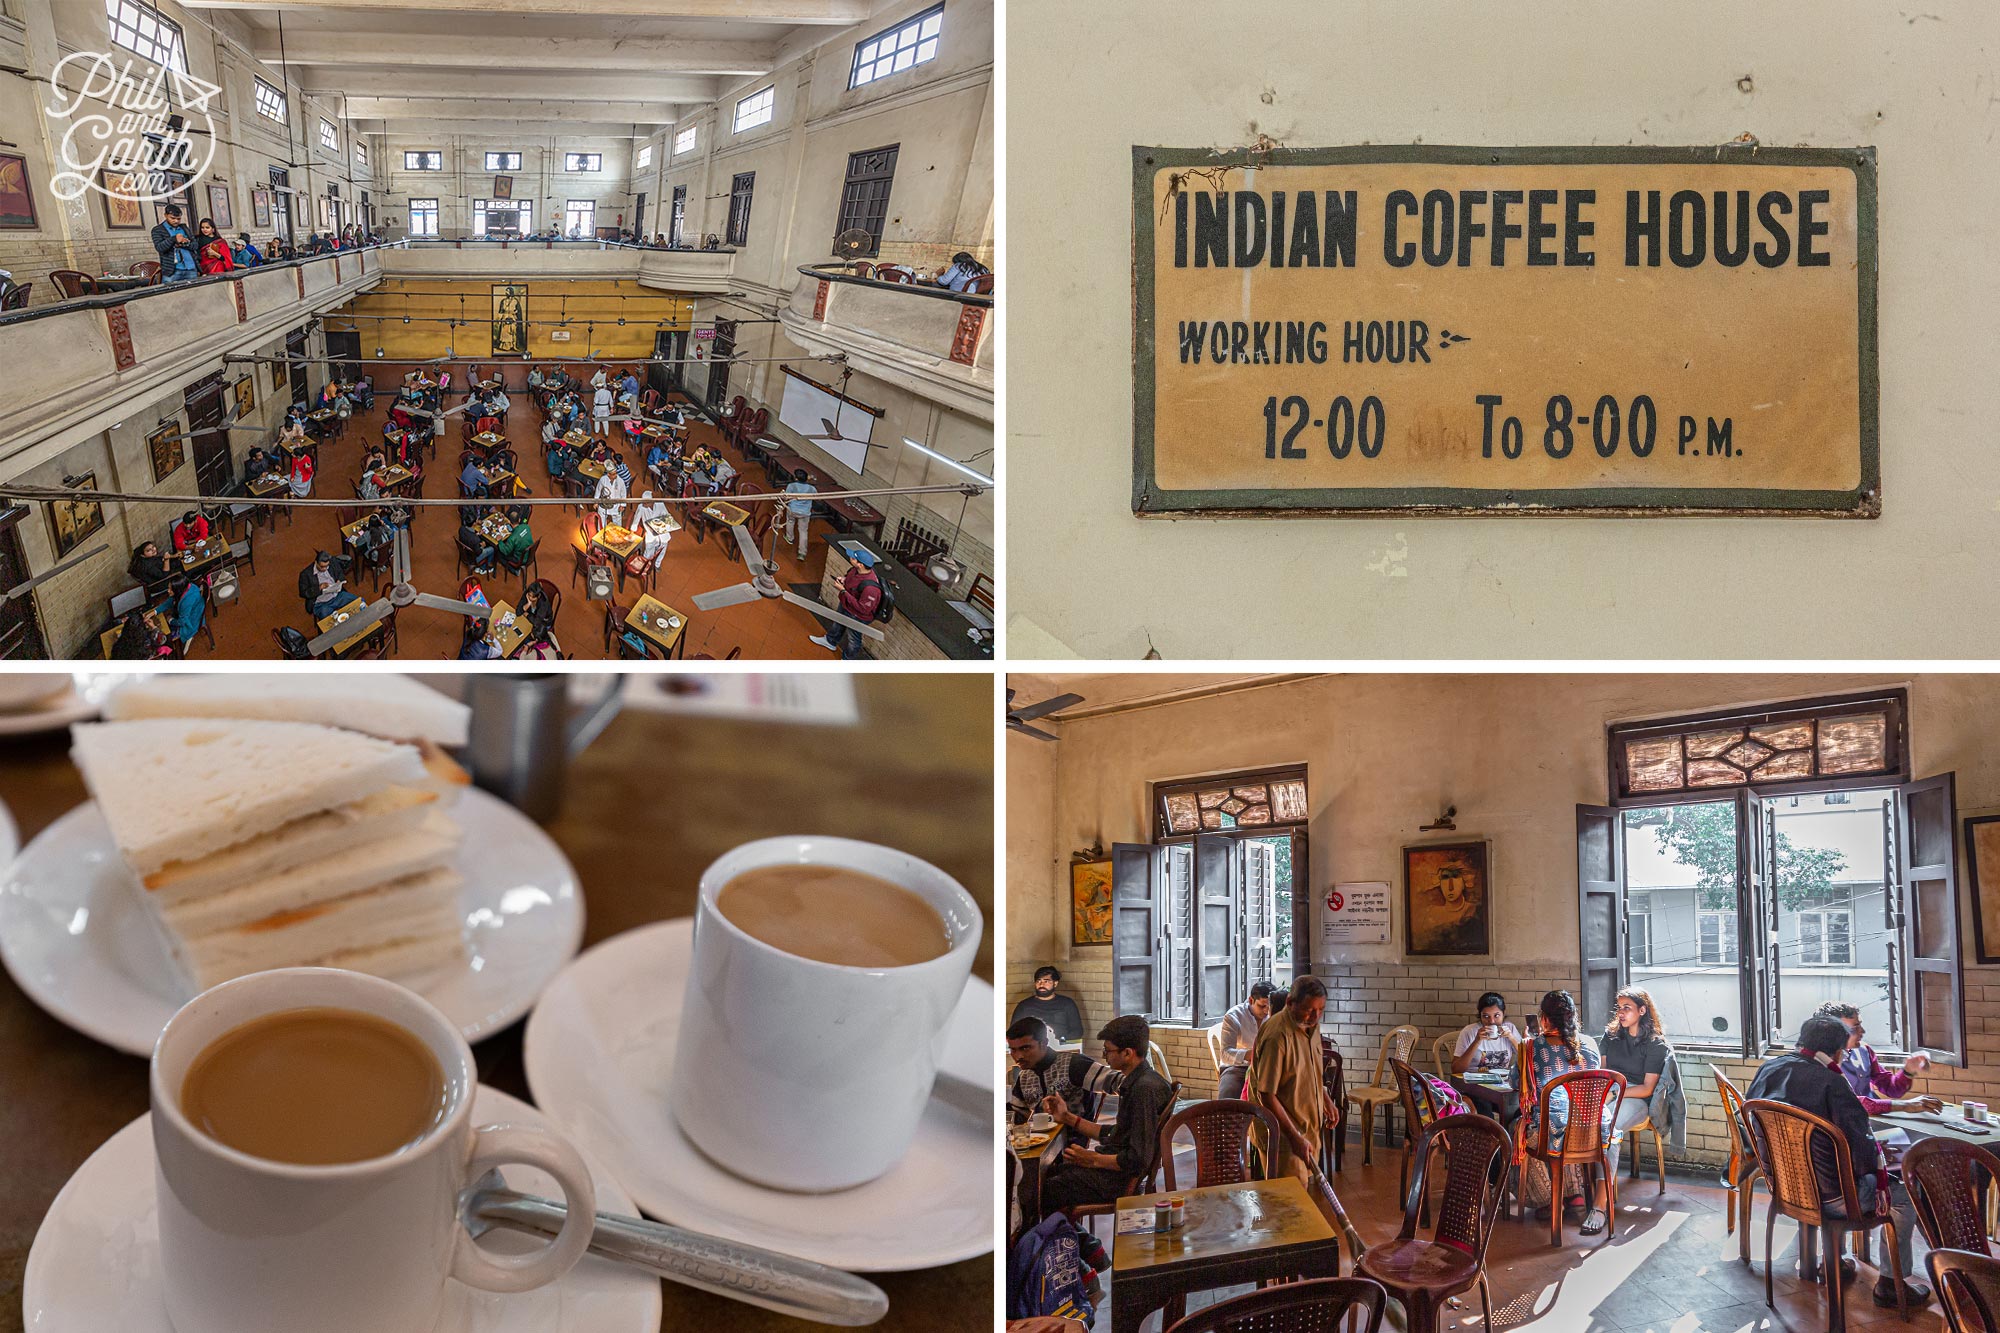 The historic Indian Coffee House housed in the former Royal Albert Hall